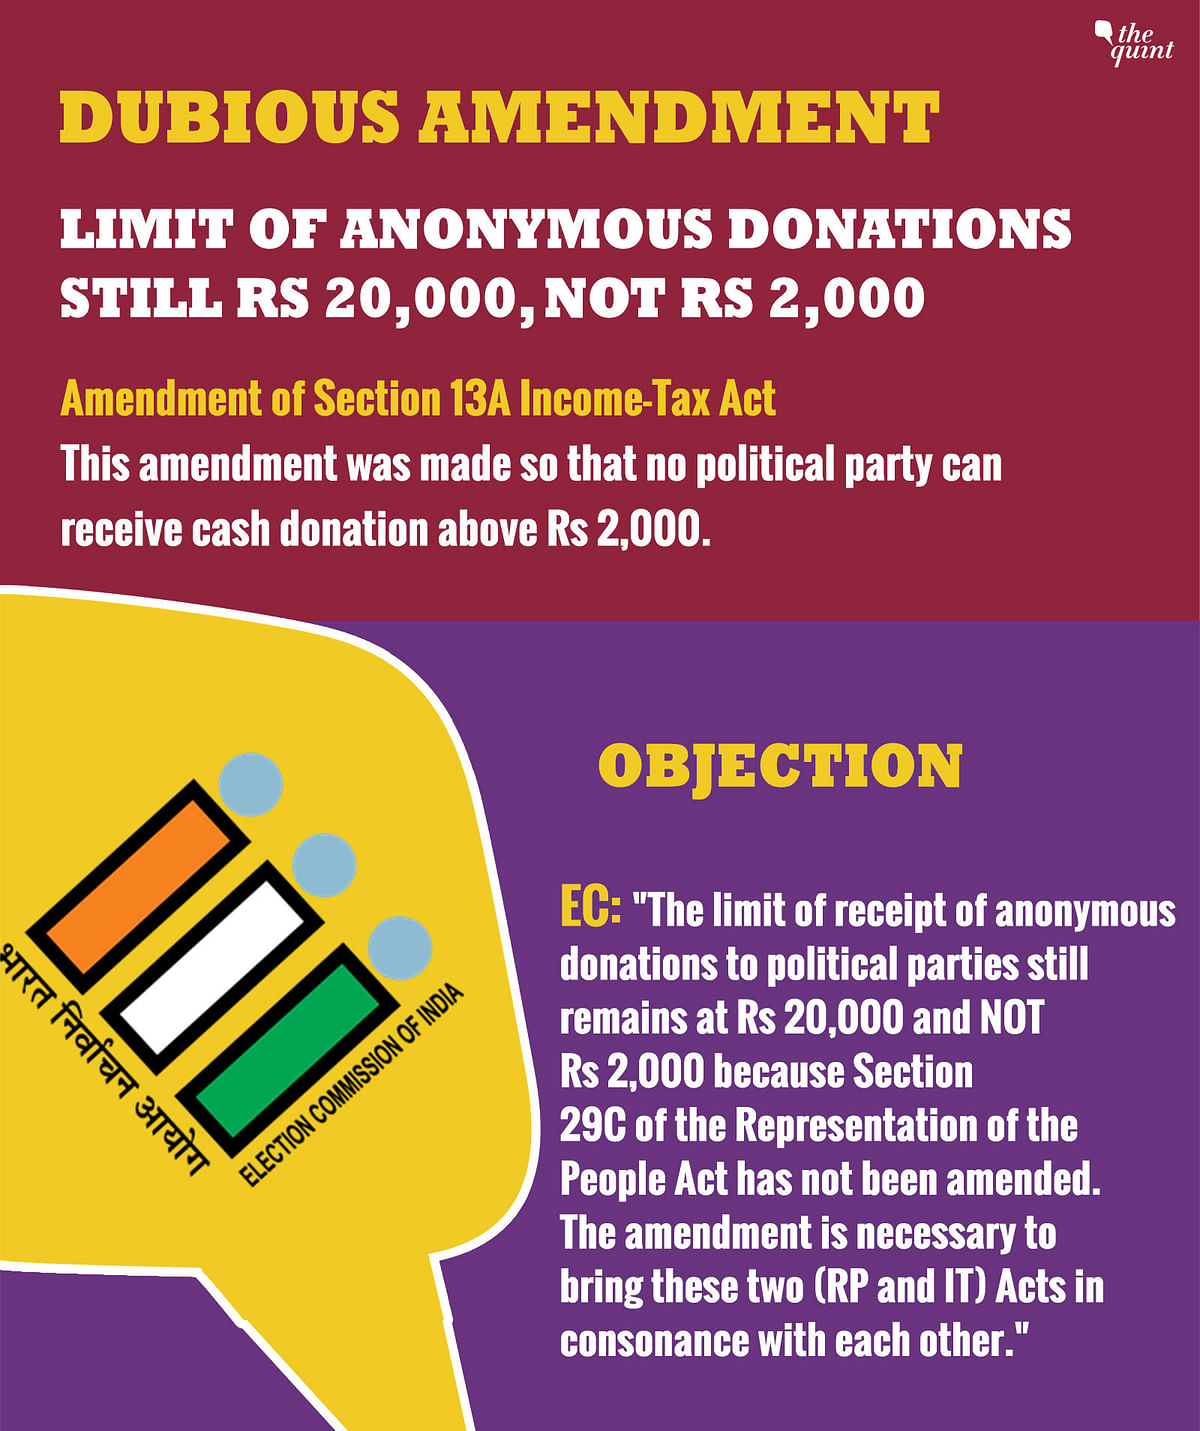 Rs 20,000 continues to be the limit of anonymous donation to be declared to the EC – Not Rs 2,000. 